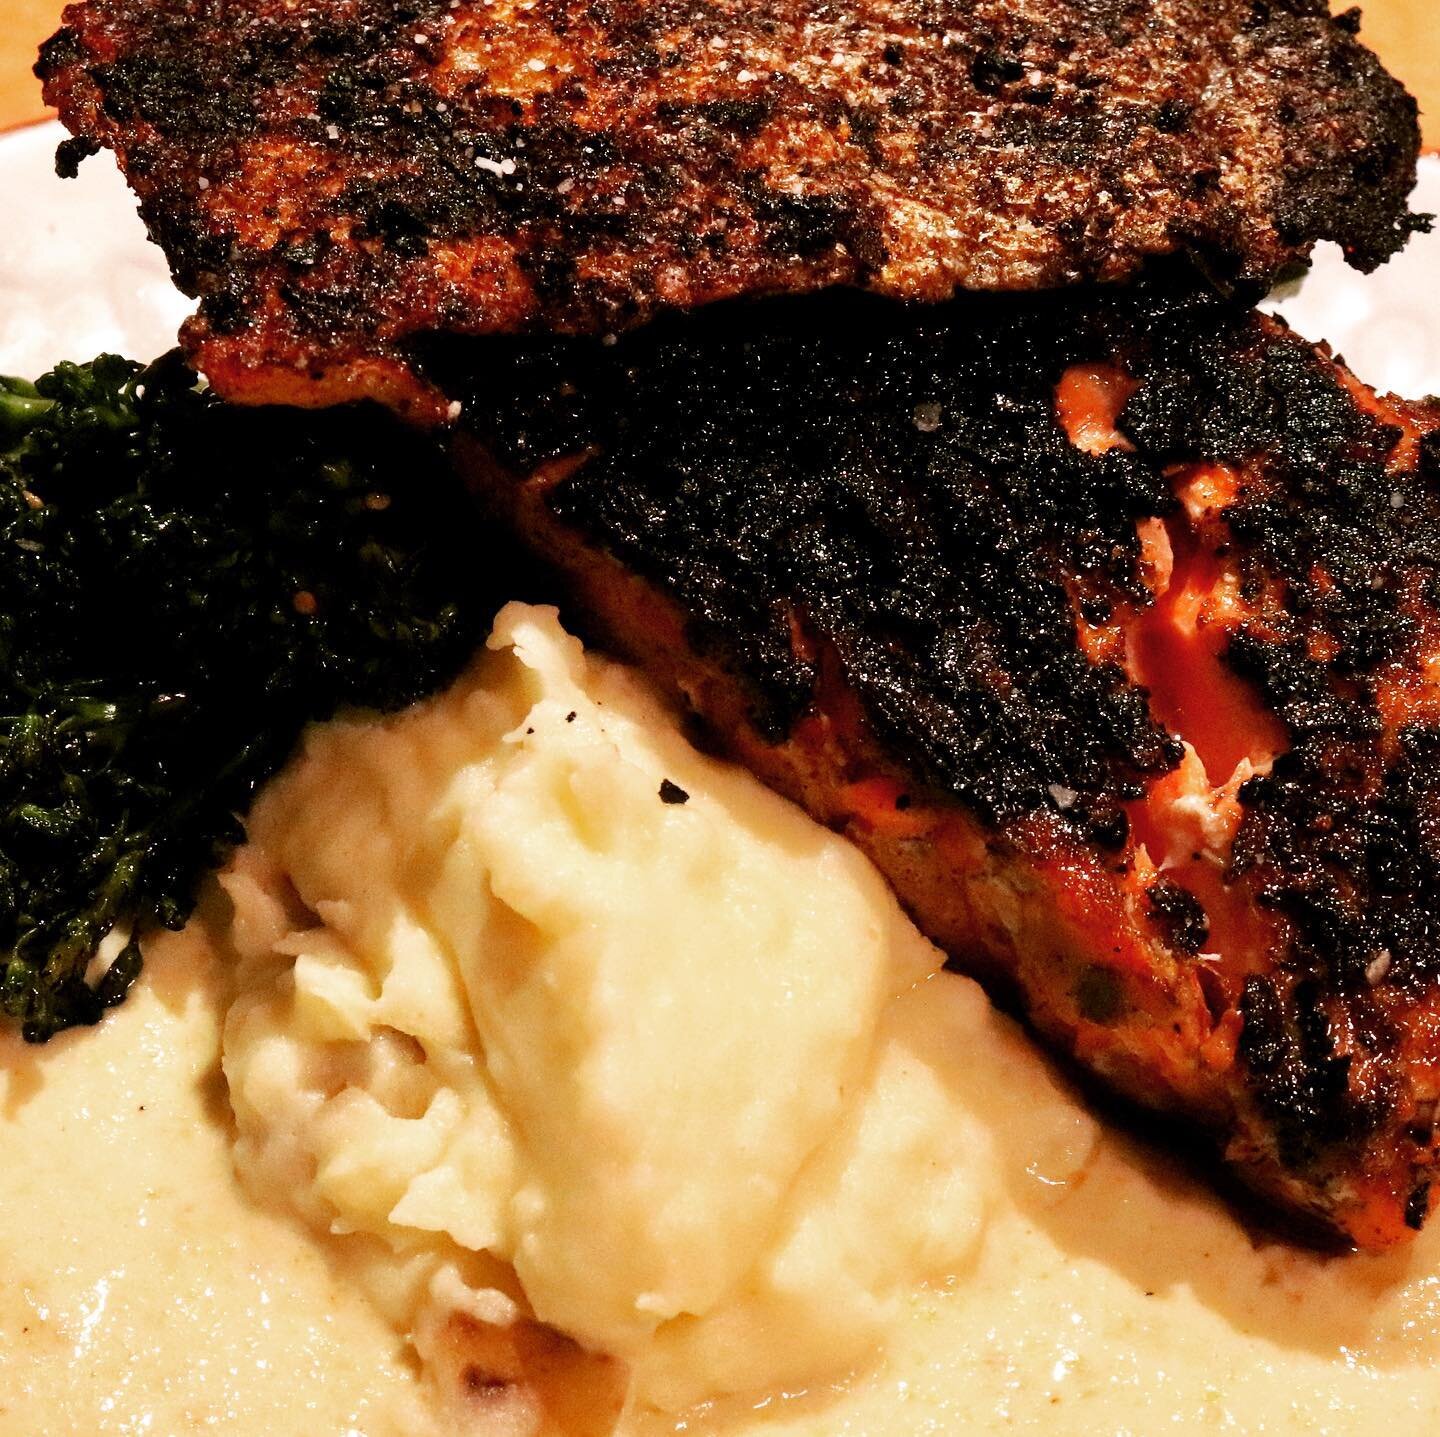 End of the season BBQ!
Barbecue New Zealand King Salmon &amp; Crispy Salmon Skin paired with Leek Fondue, Whipped Potatoes and Grilled Broccolini with Sesame #kingsalmon #crispysalmon #foodies #cheflife